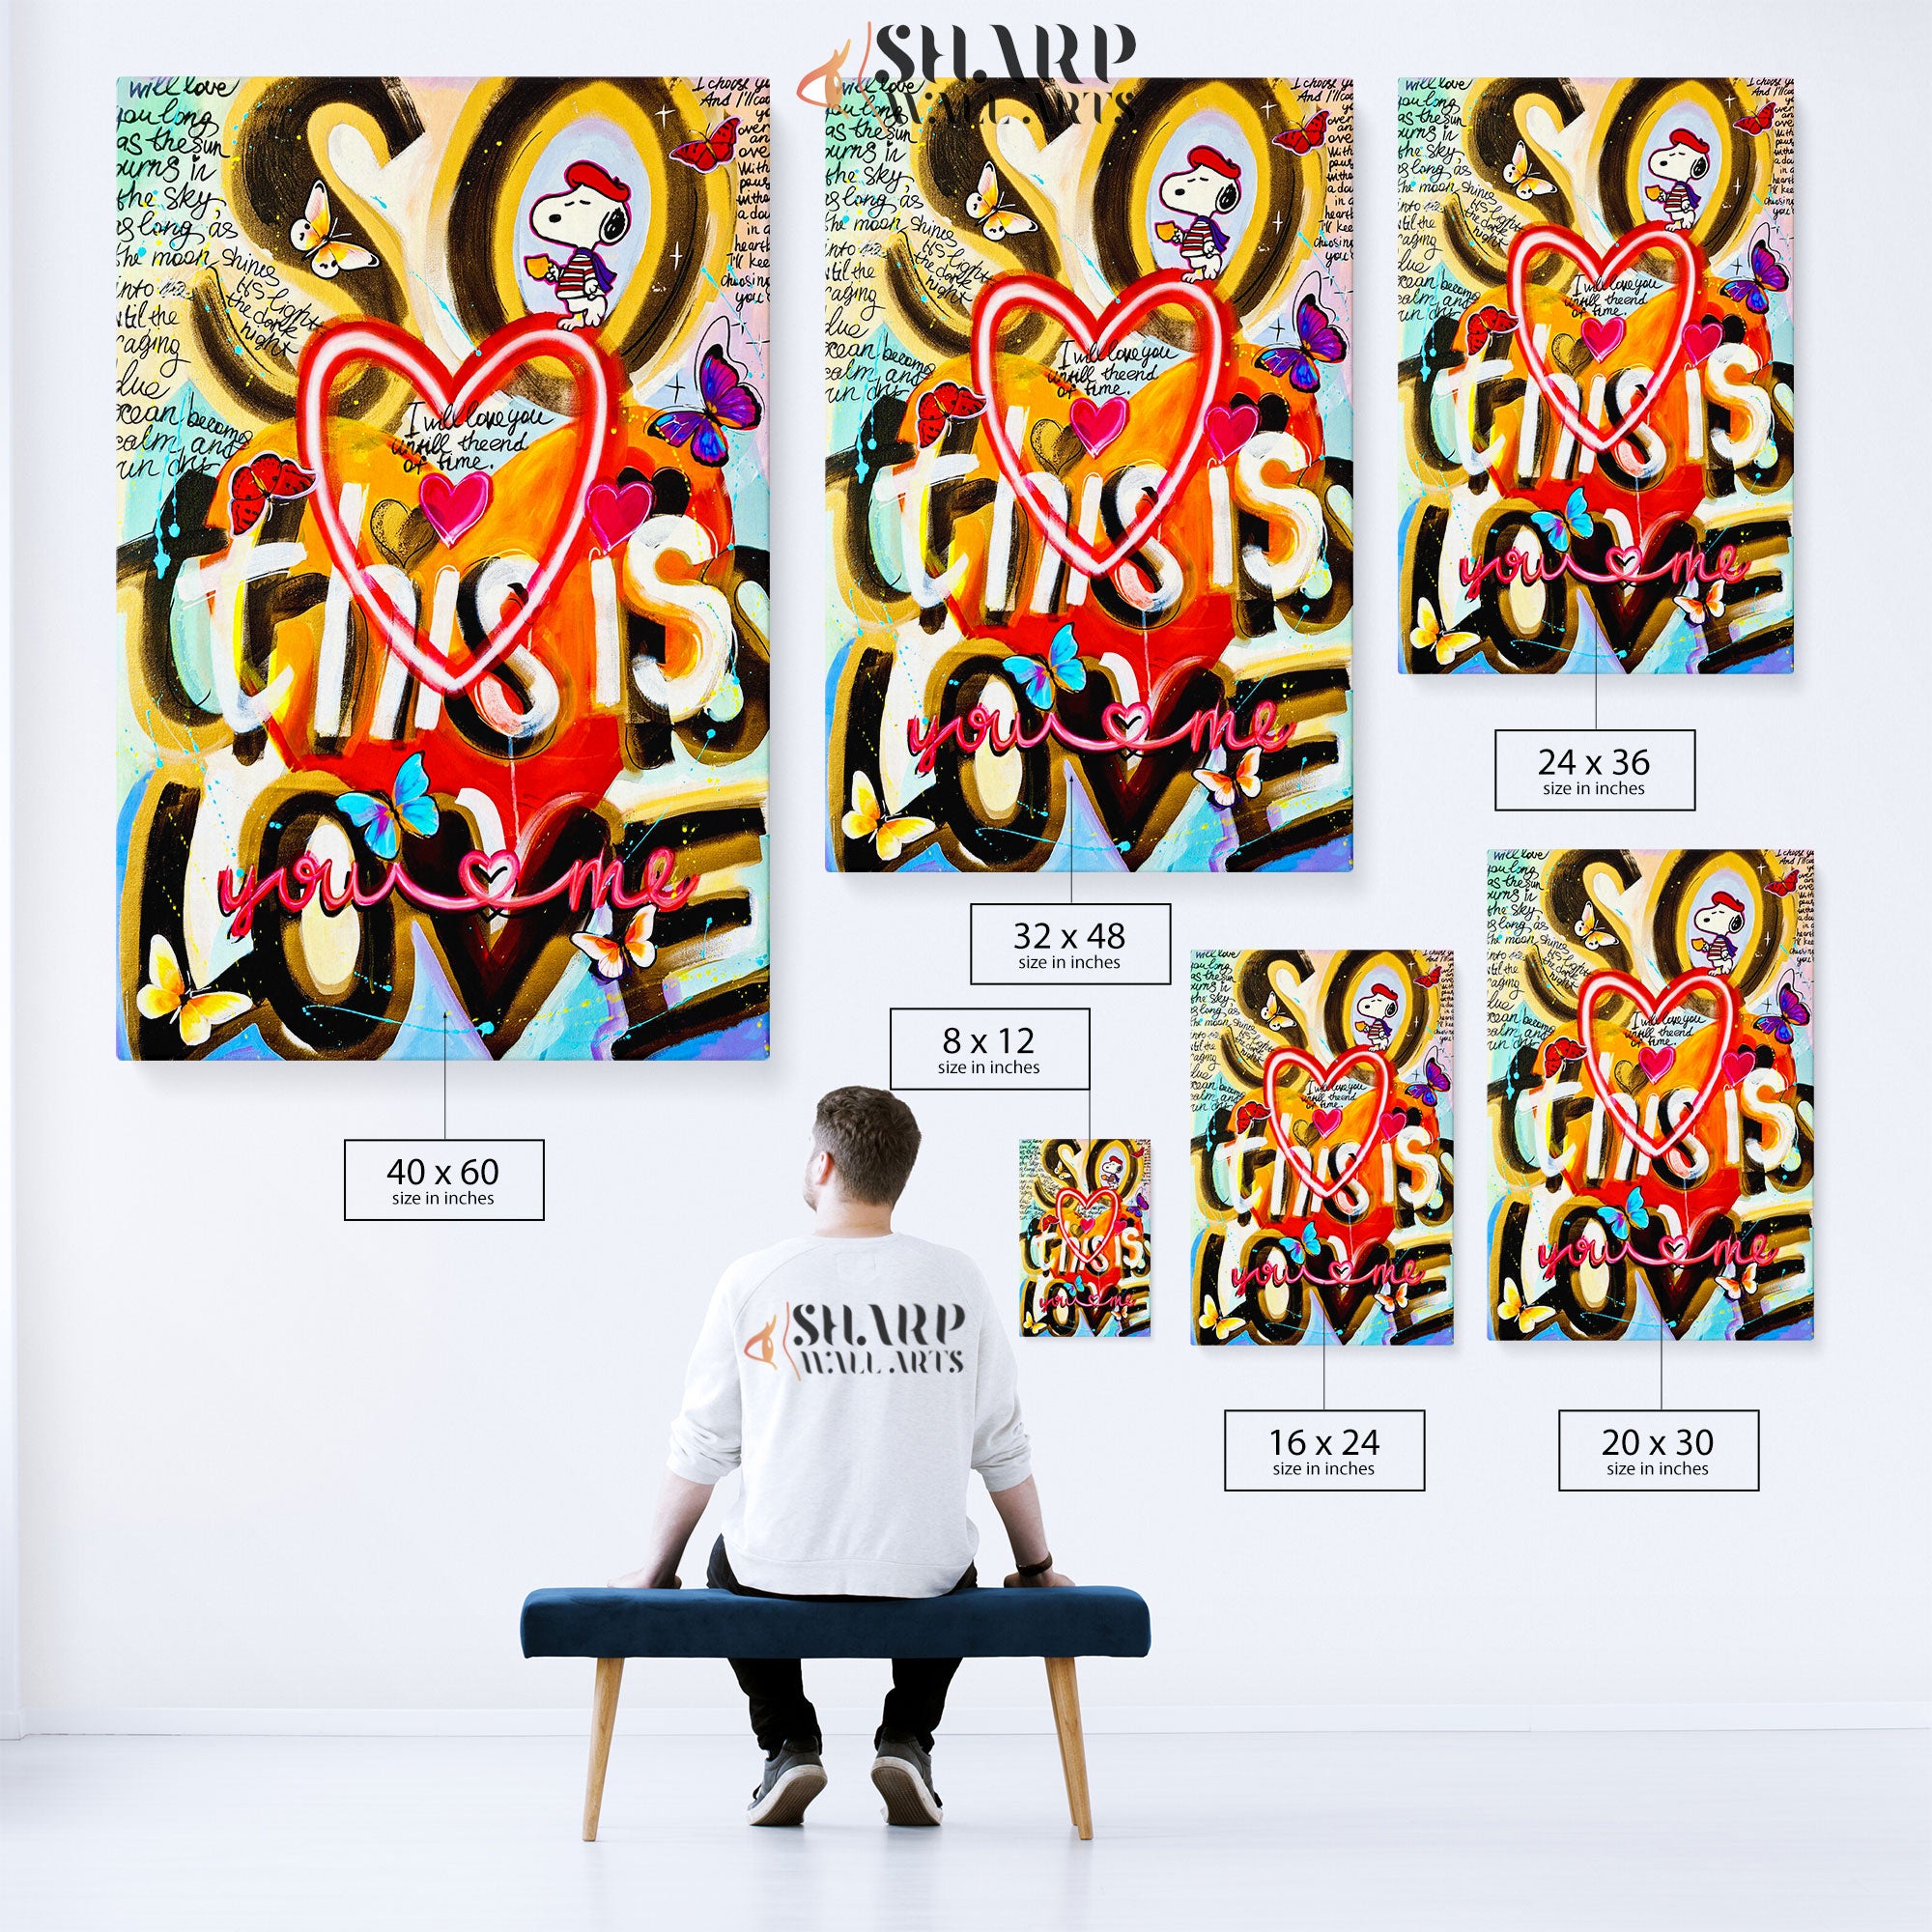 So This Is Love Canvas Wall Art